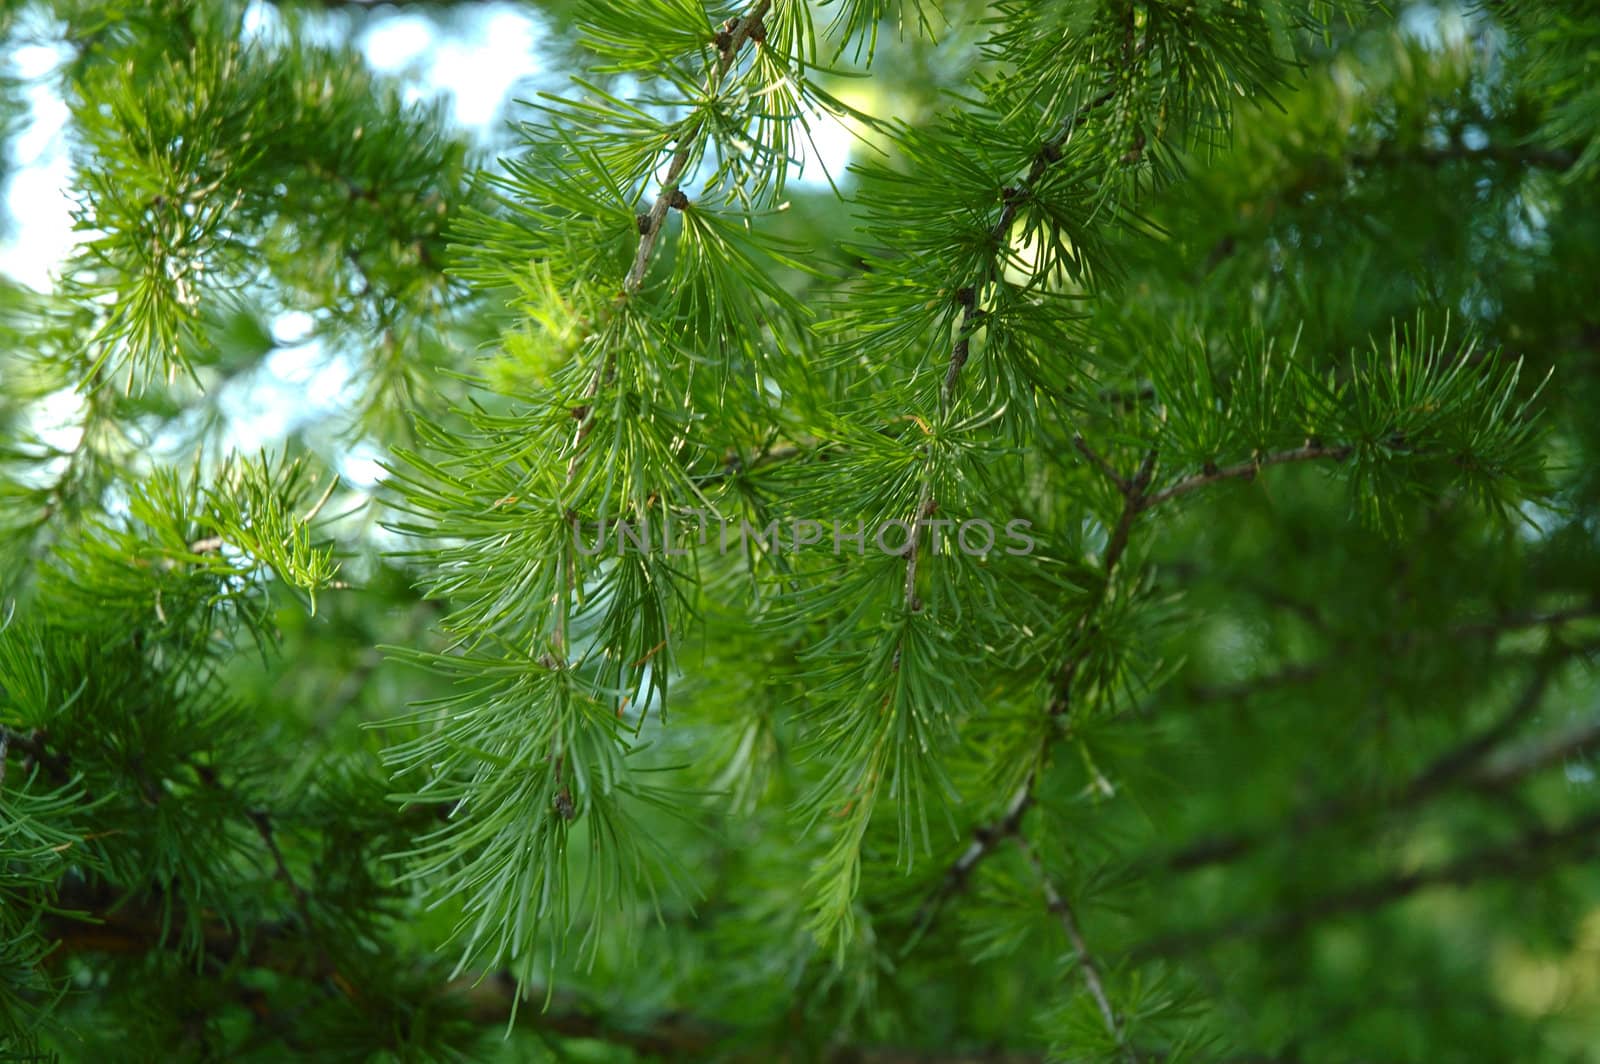 Conifer branchlets (Spruce). Brightly green needles - summer nature background.